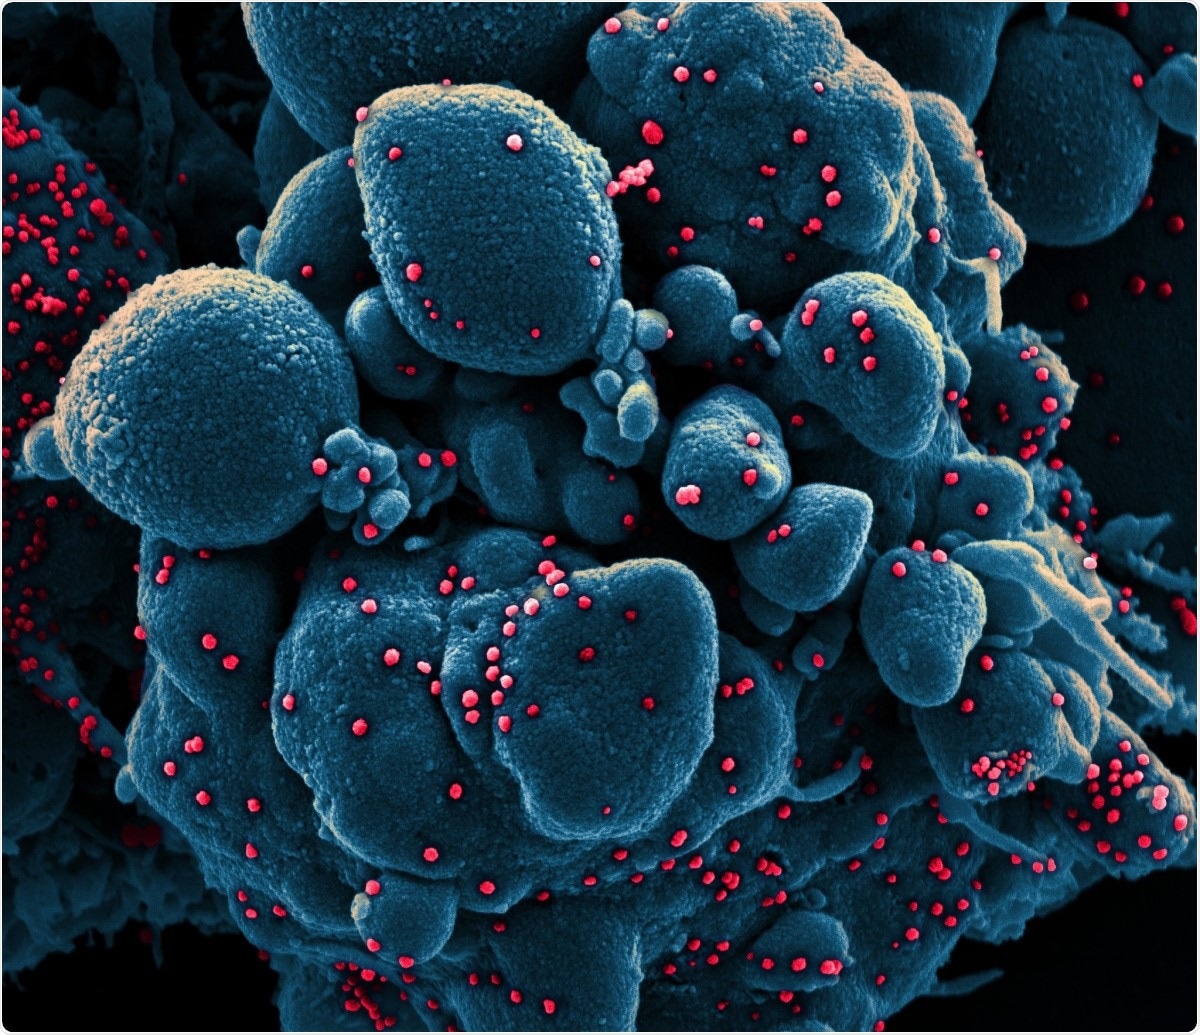 Colorized Novel coronavirus SARS-CoV-2. scanning electron micrograph of an apoptotic cell (blue) infected with SARS-COV-2 virus particles (red), isolated from a patient sample. Image captured at the NIAID Integrated Research Facility (IRF) in Fort Detrick, Maryland. Image Credit: NIAID / Flickr